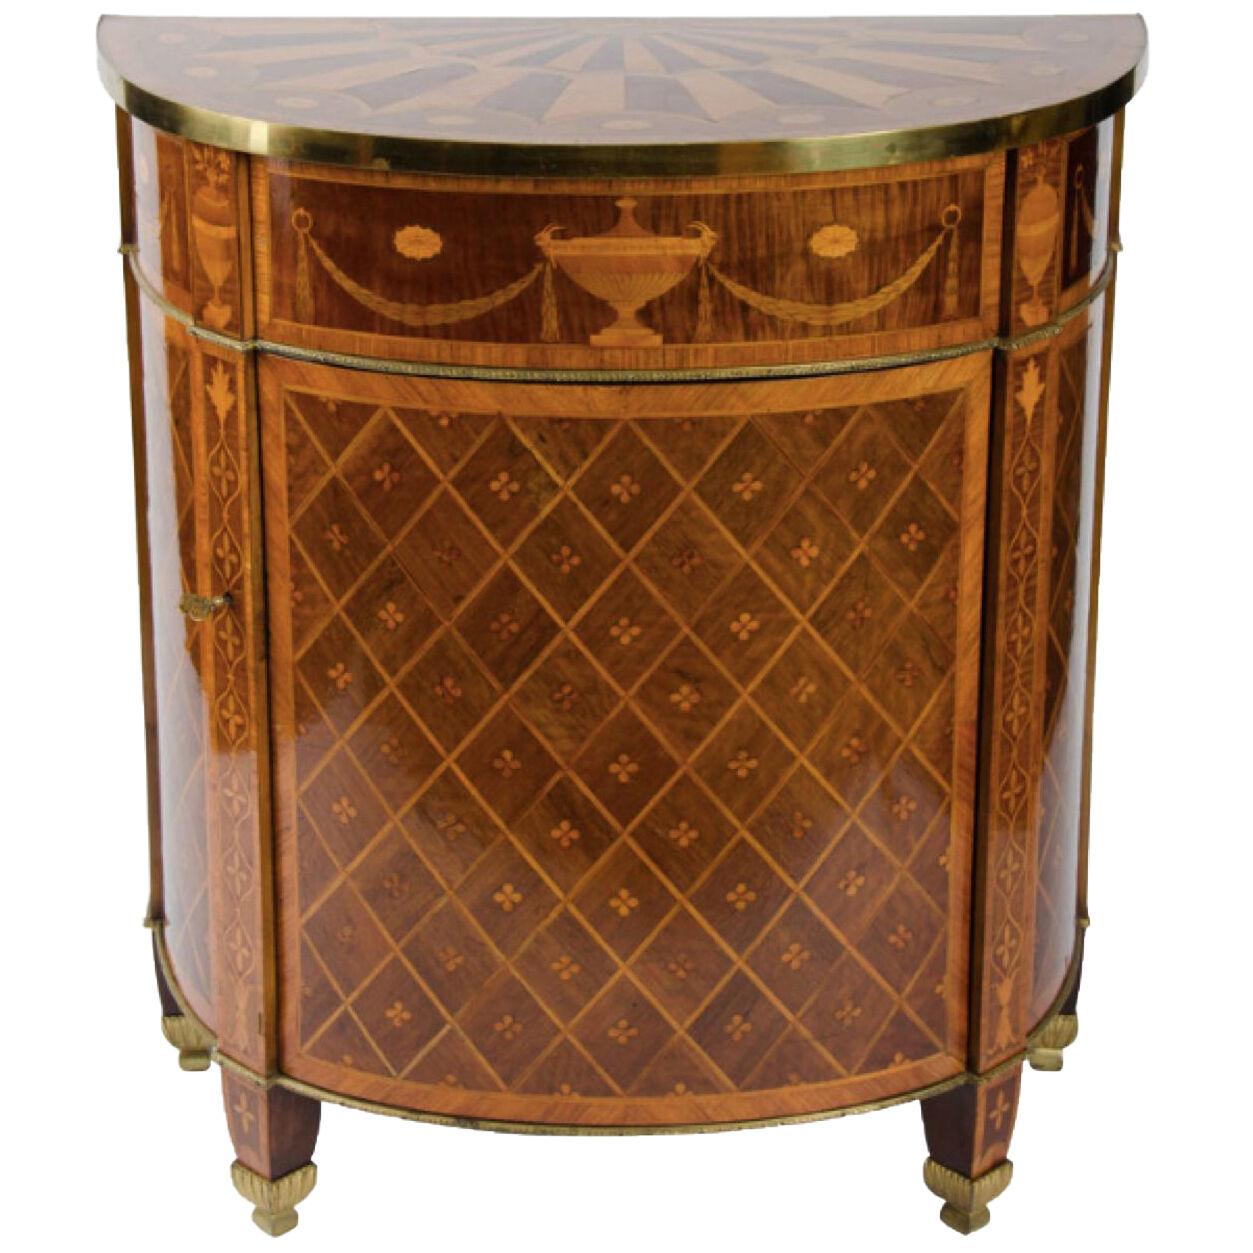 George III period demi-lune commode in the manner of John Linnell